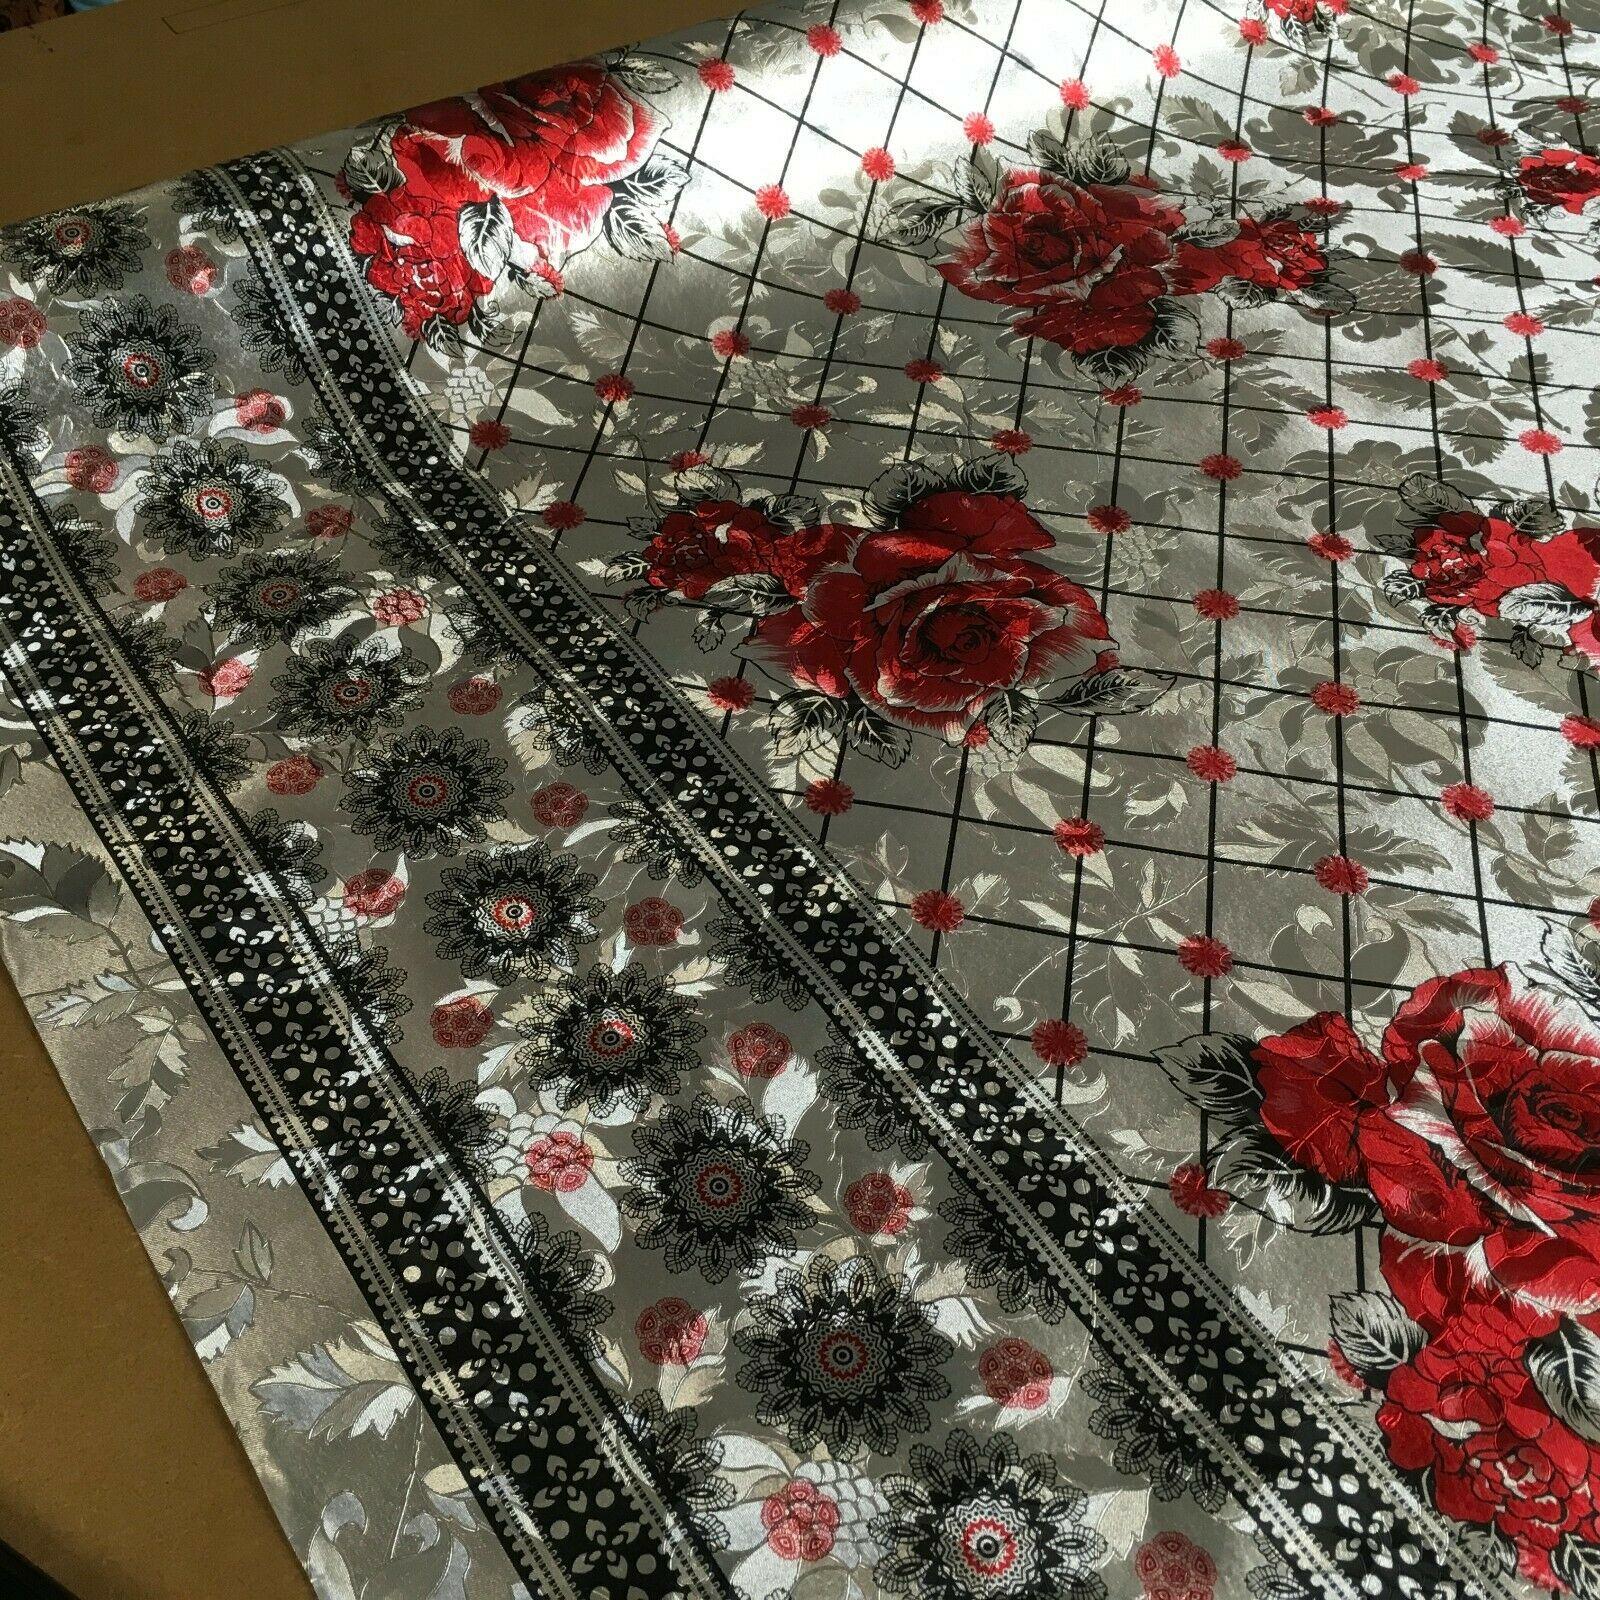 Metallic Silver Floral border Wipe clean table cover Fabric 139 cm M1204 Mtex